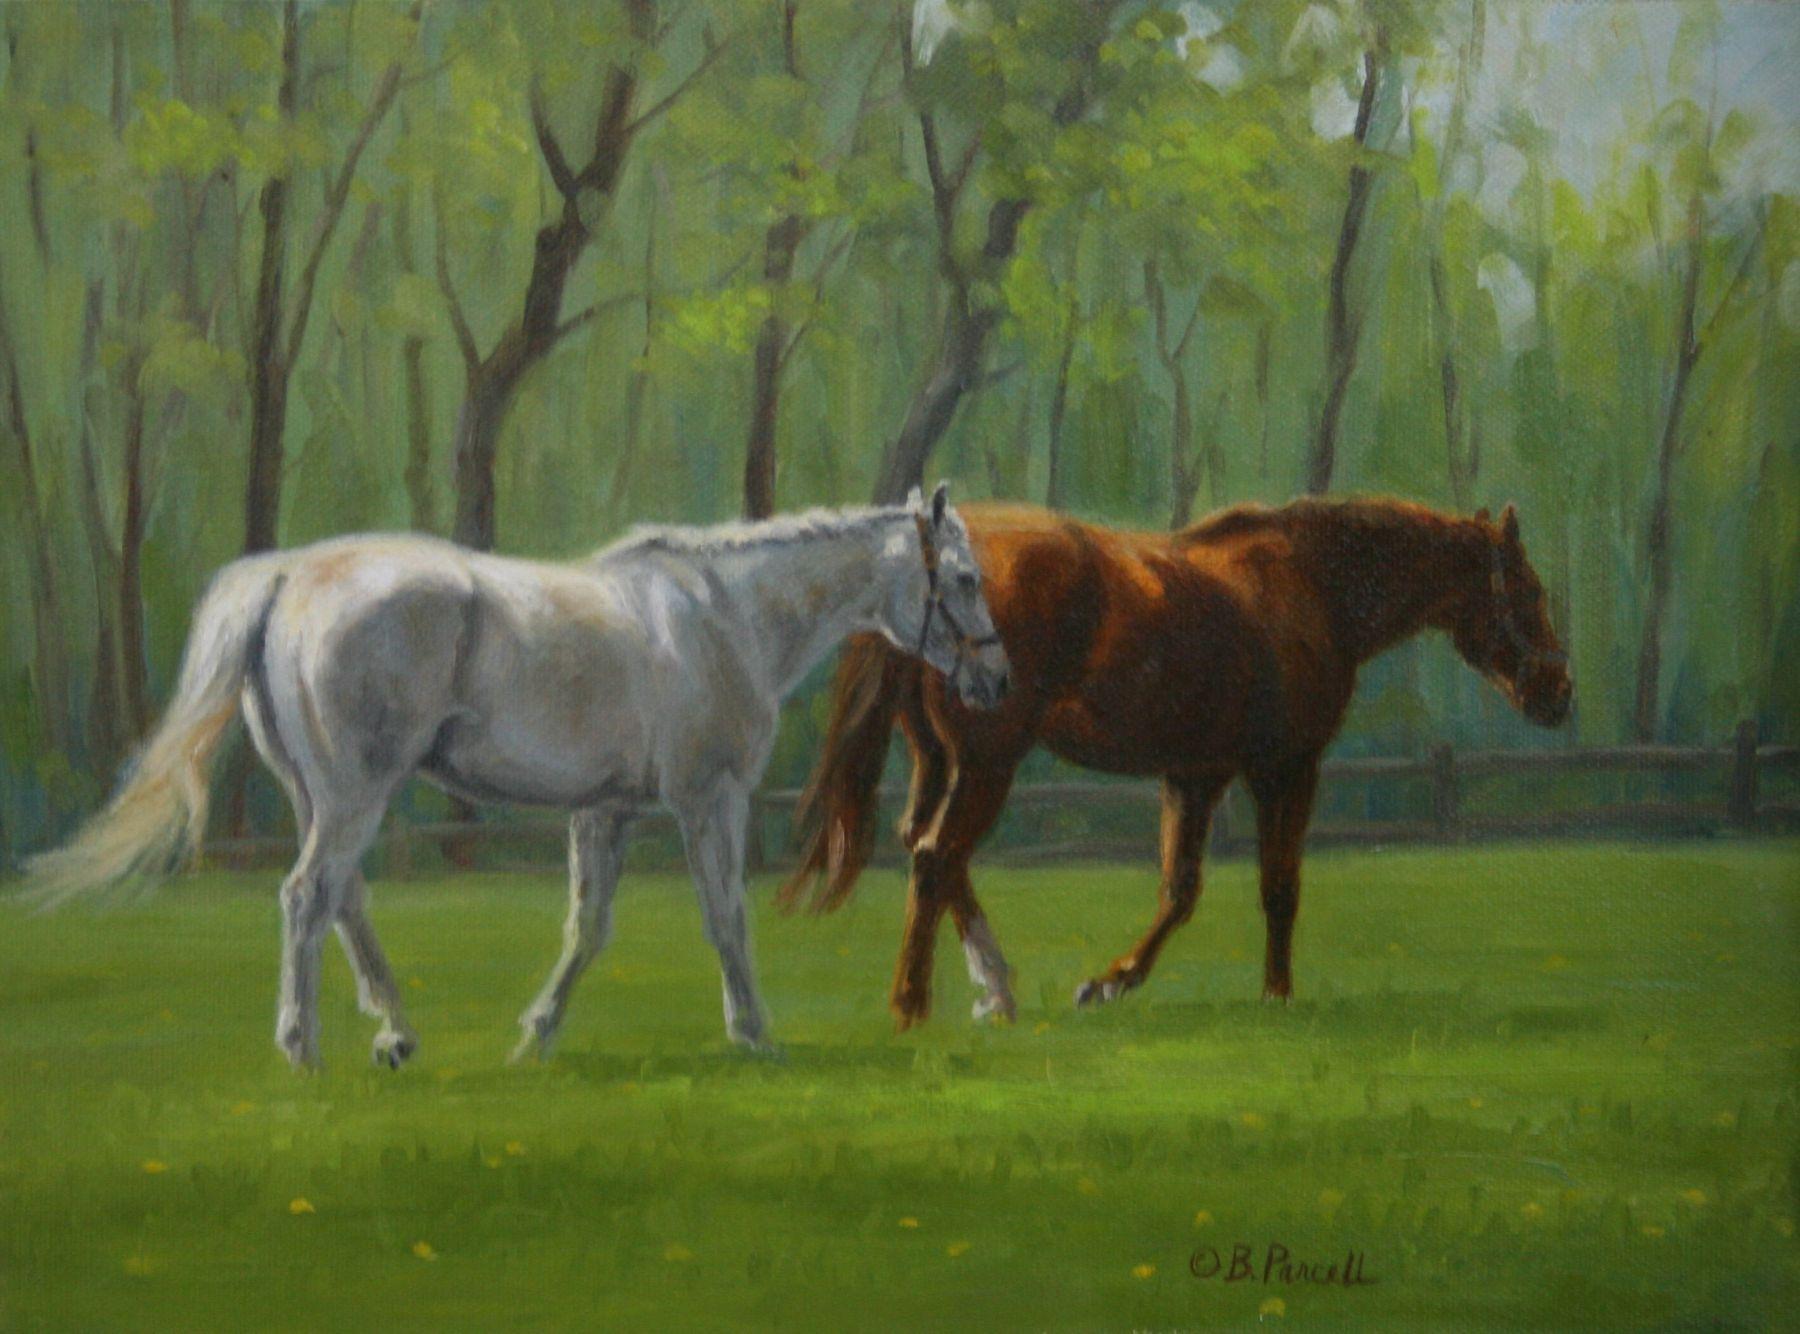 Beth Parcell, "Spring", 9x12 Equine Horse Landscape Oil Painting on Canvas 